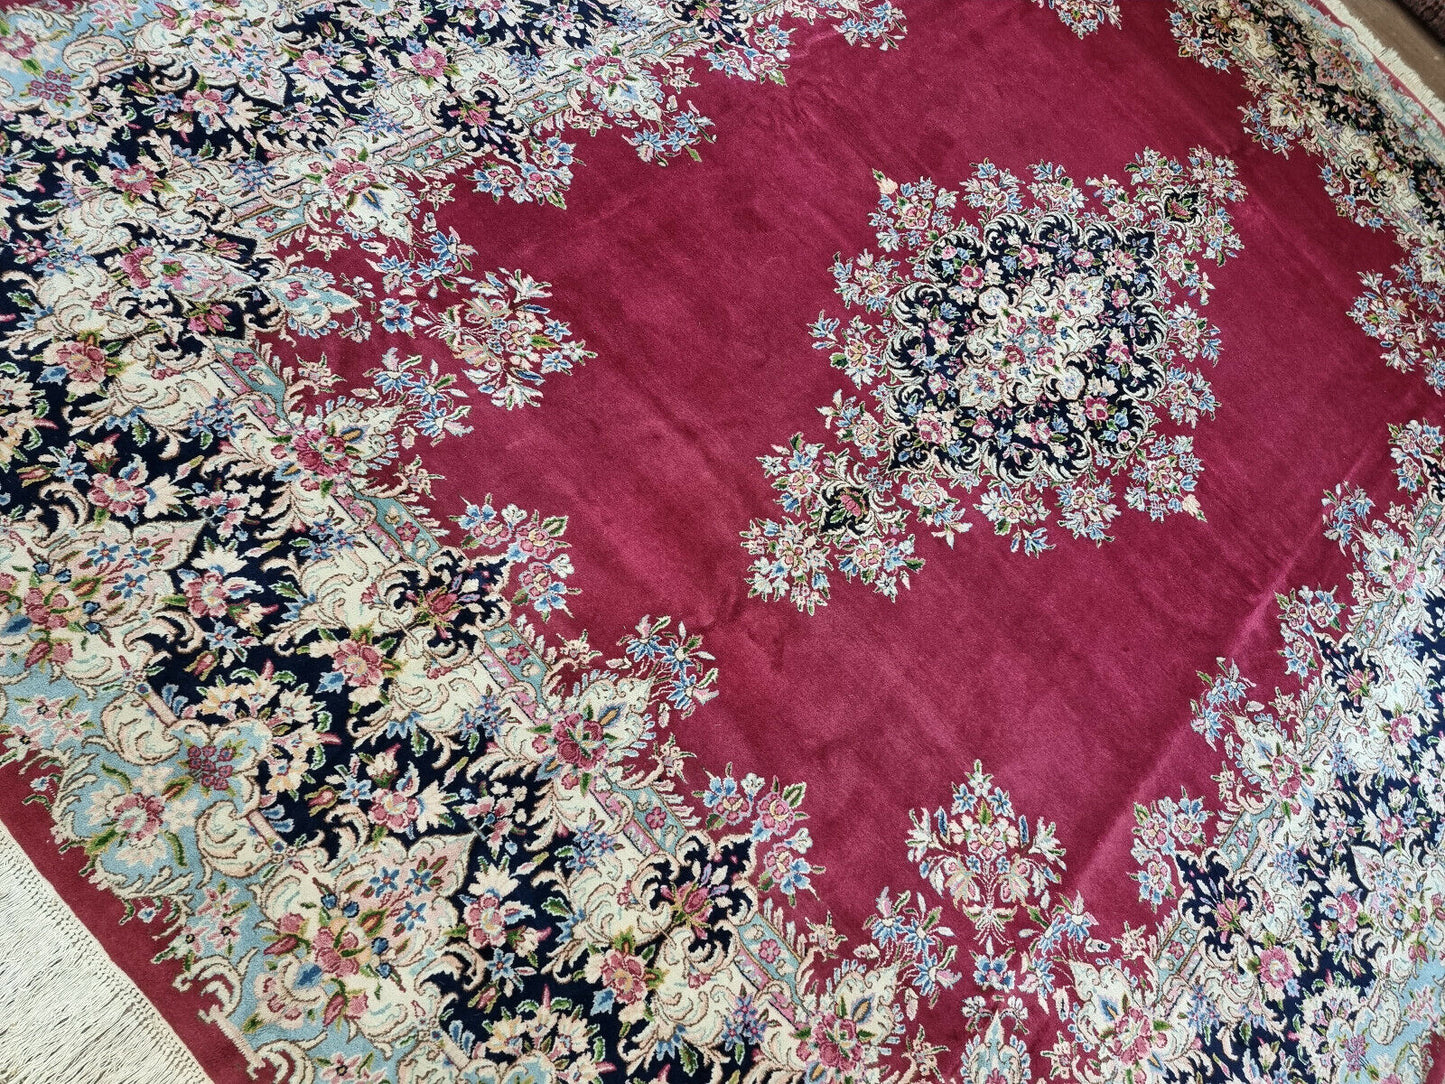 Close-up of cozy and inviting texture on Handmade Vintage Persian Kerman Rug - Detailed view showcasing the cozy and inviting texture of the rug.